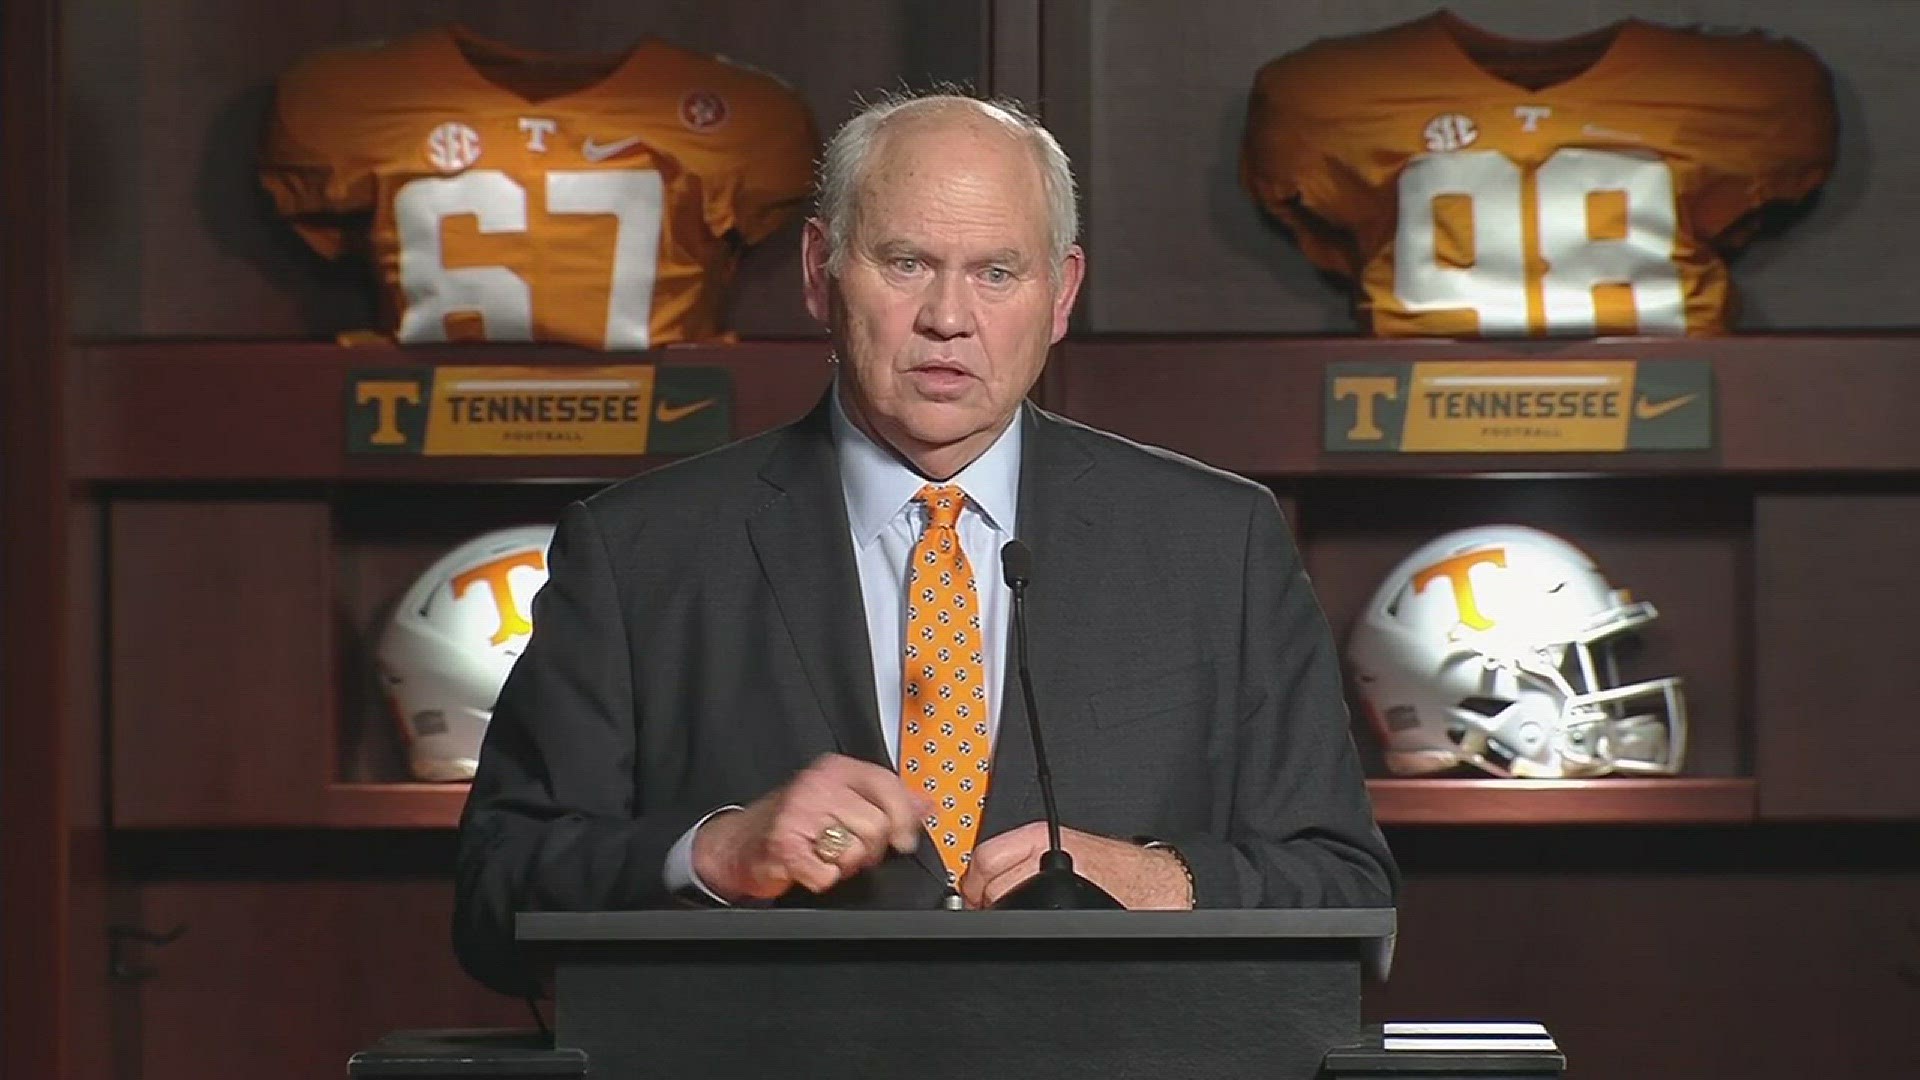 Fulmer lauds Coach Pruitt's intensity, and explains how playing good defense is the way to find success in the SEC.